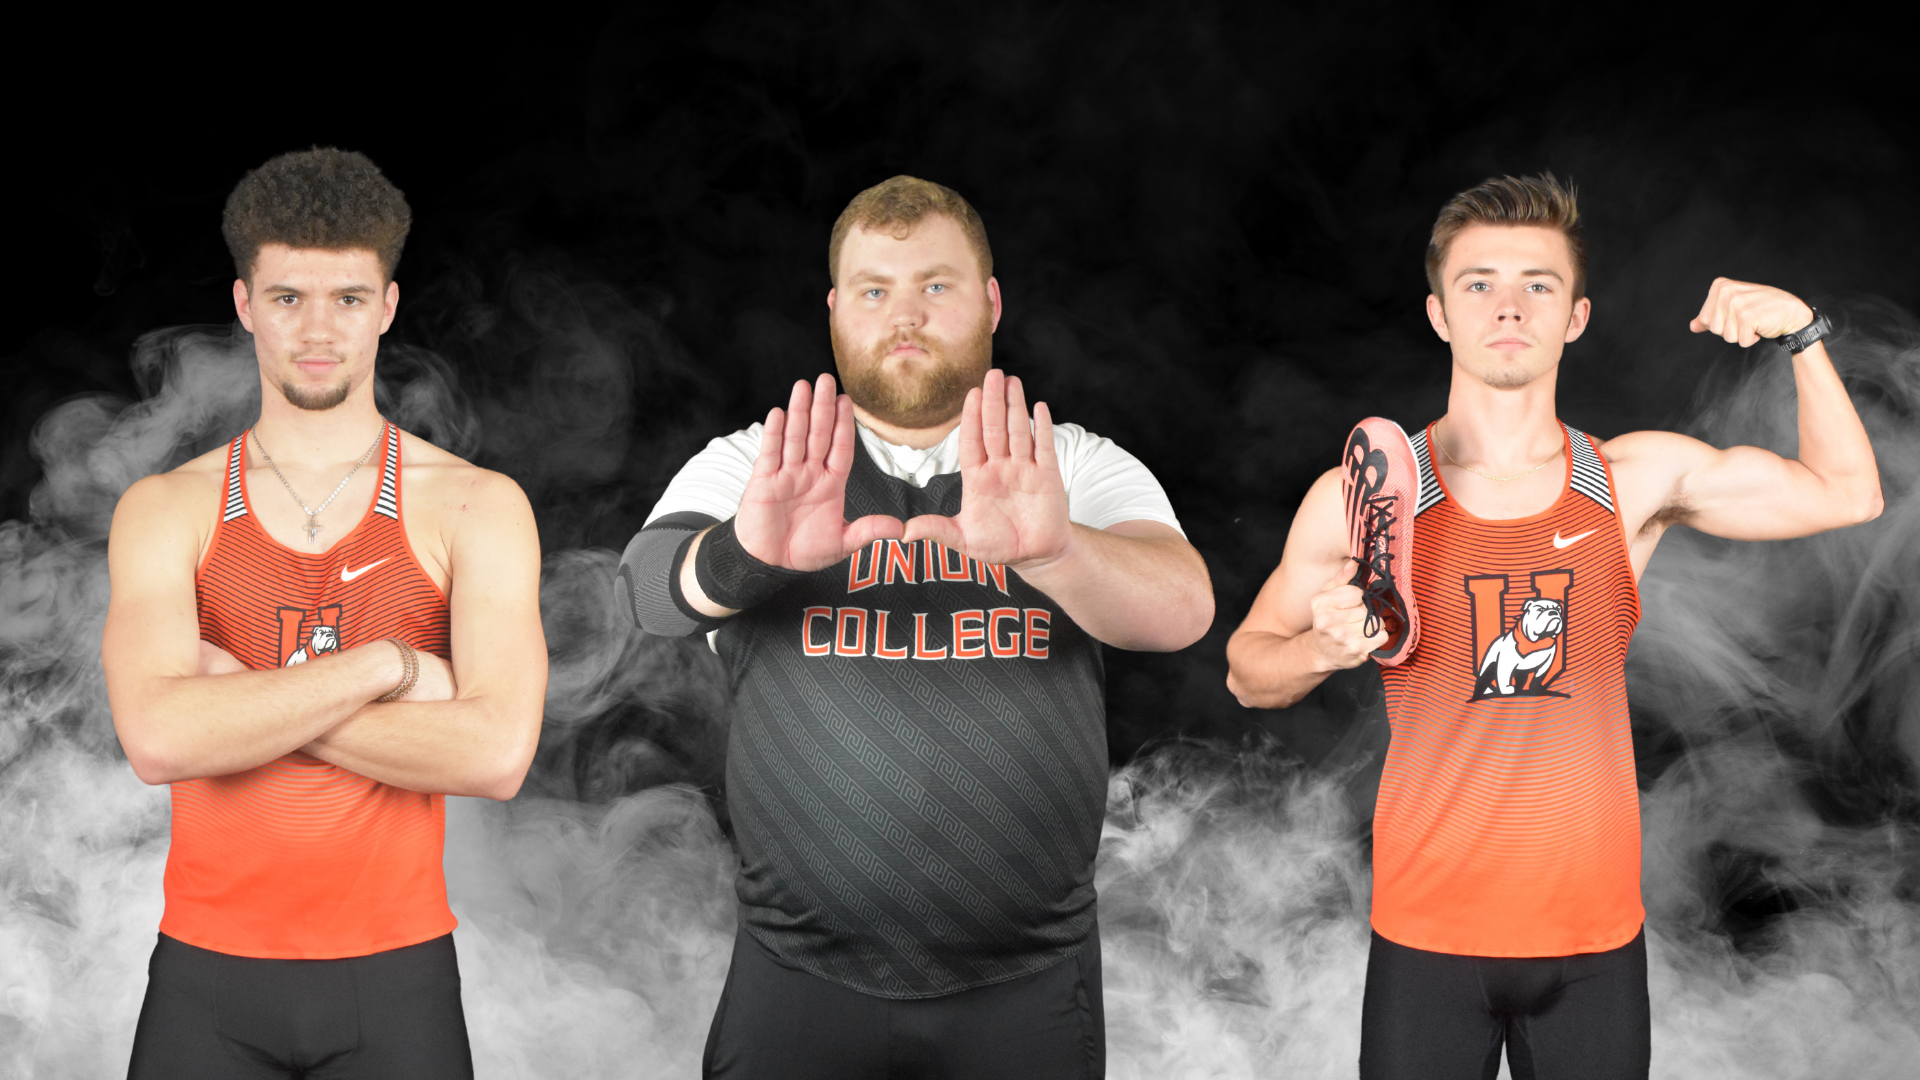 Union men's track and field outdoor season preview